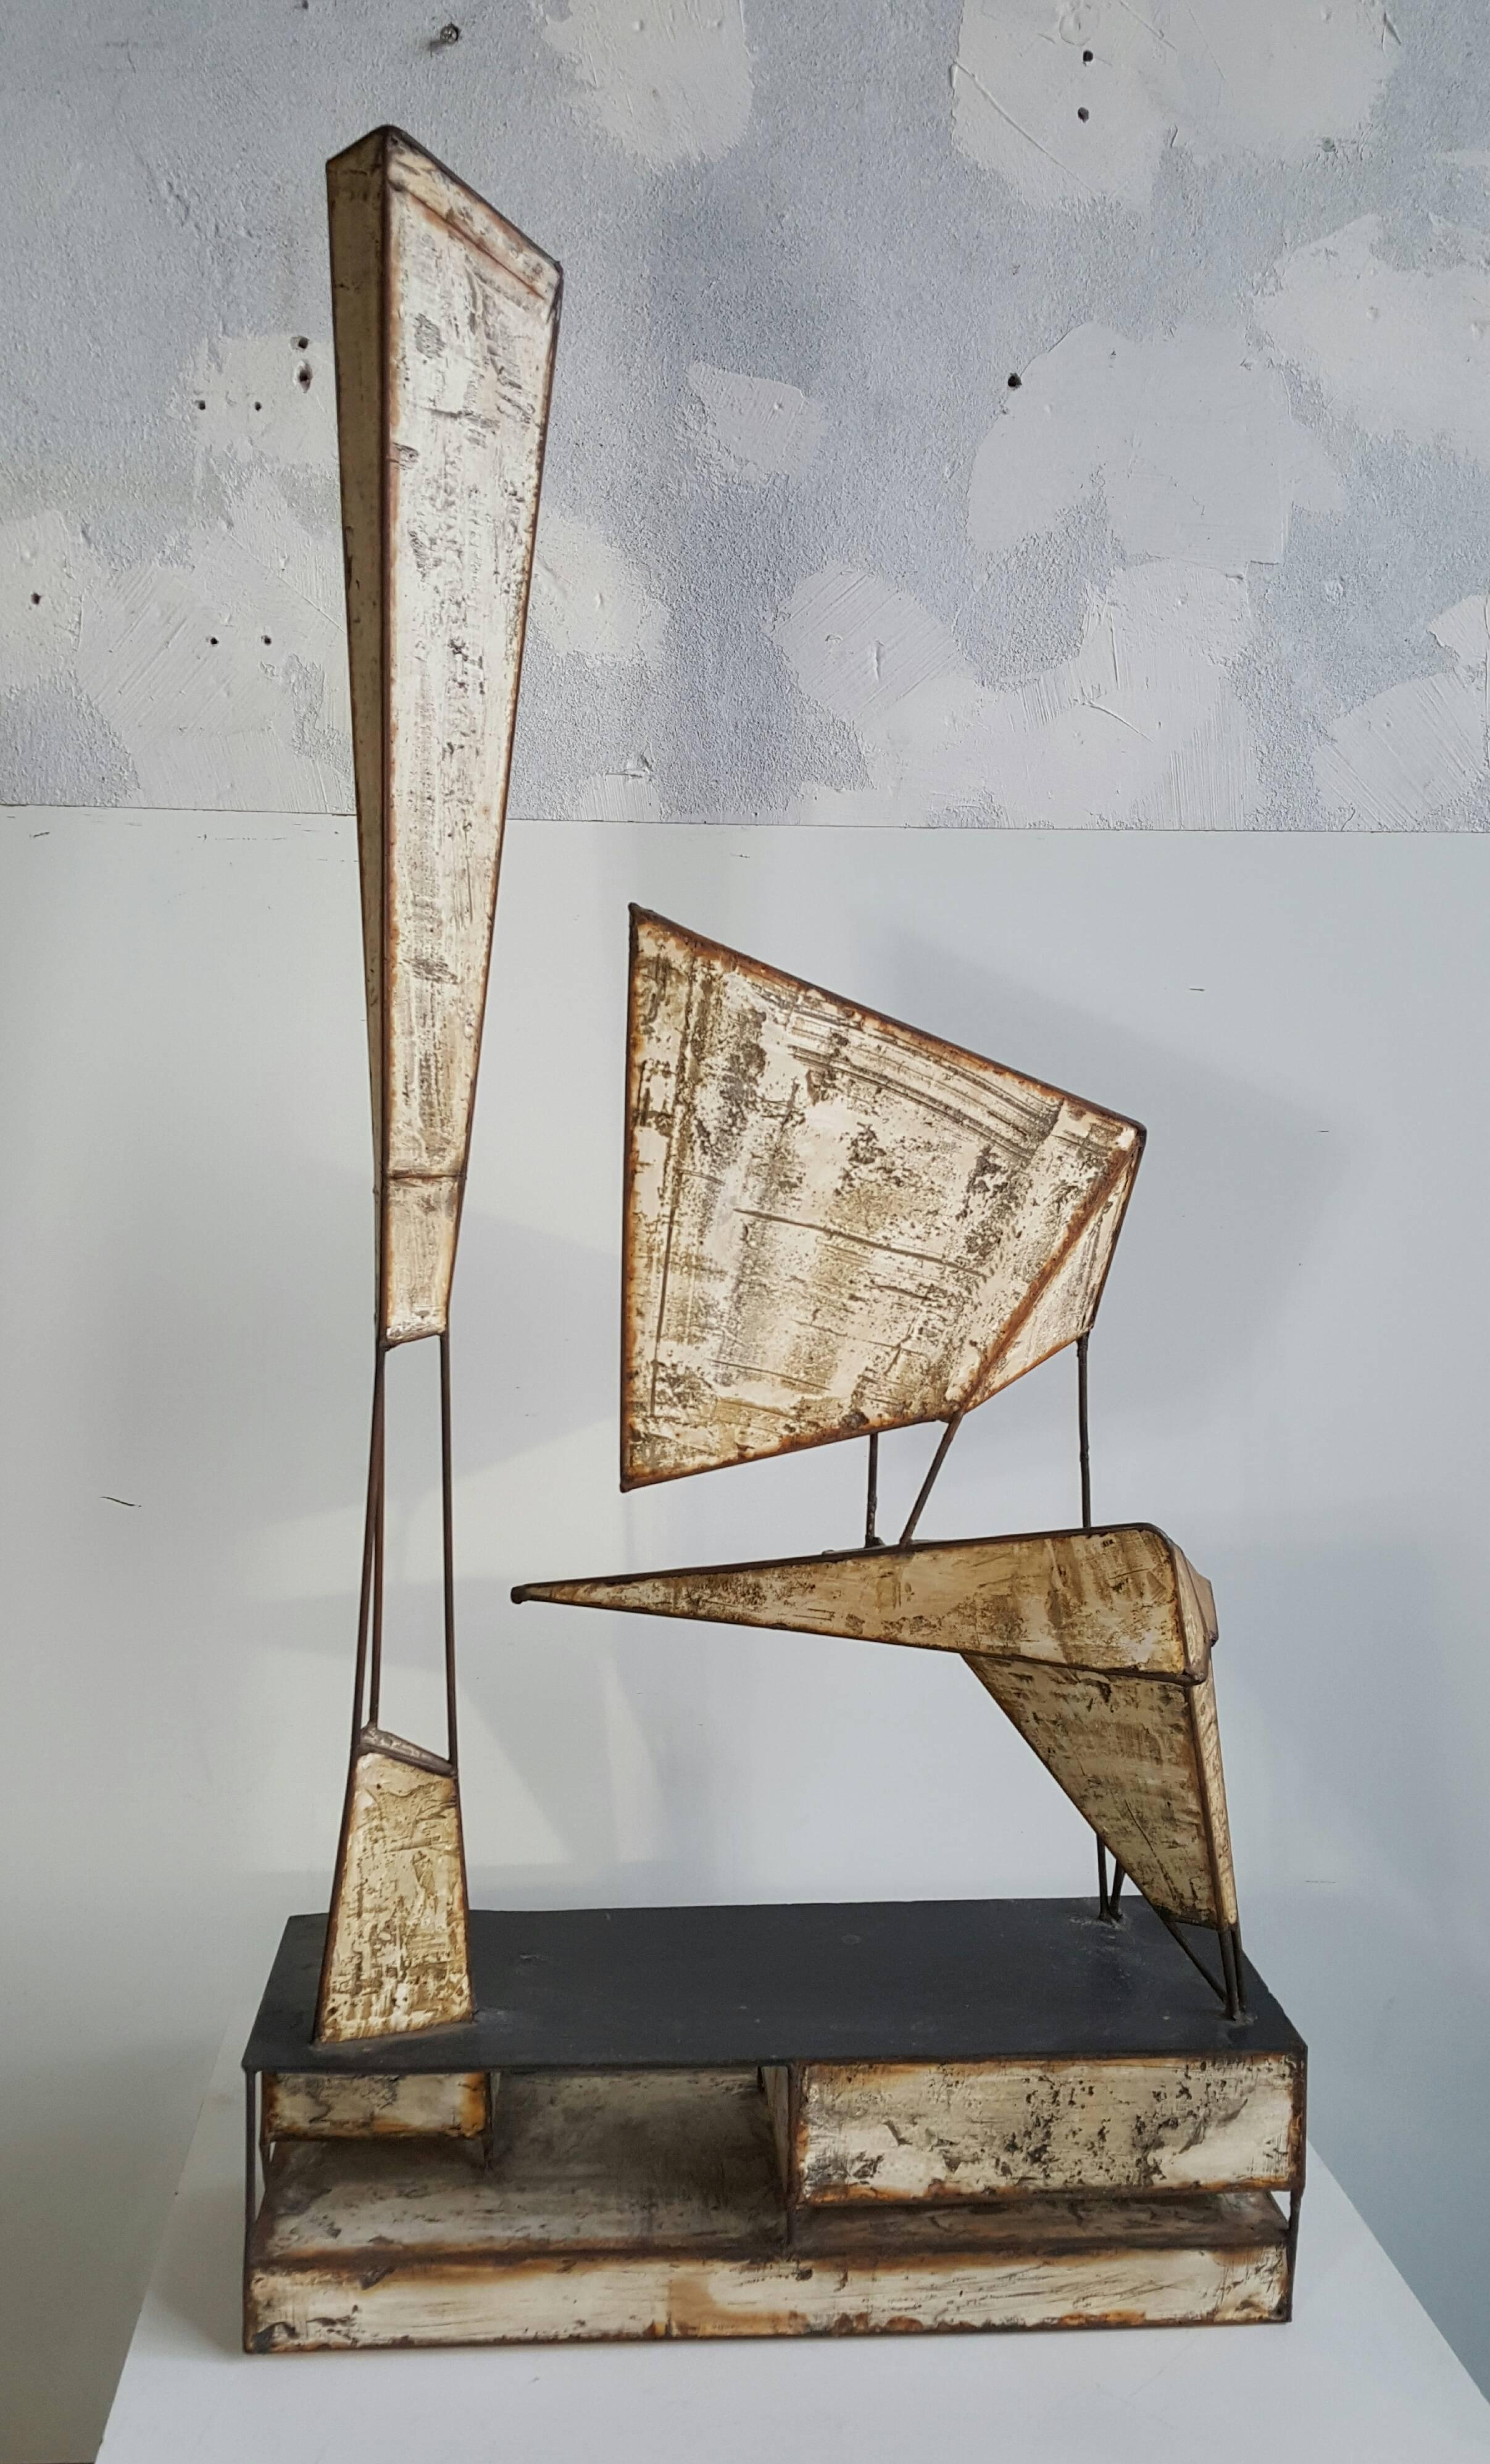 Large modernist abstract sculpture. Wire rod and stolit, unsigned, extremely well executed, circa 1950 after Lynn Chadwick who after WWI developed a construction method using welded steel rods with industrial compound called Stolit, a mixture of